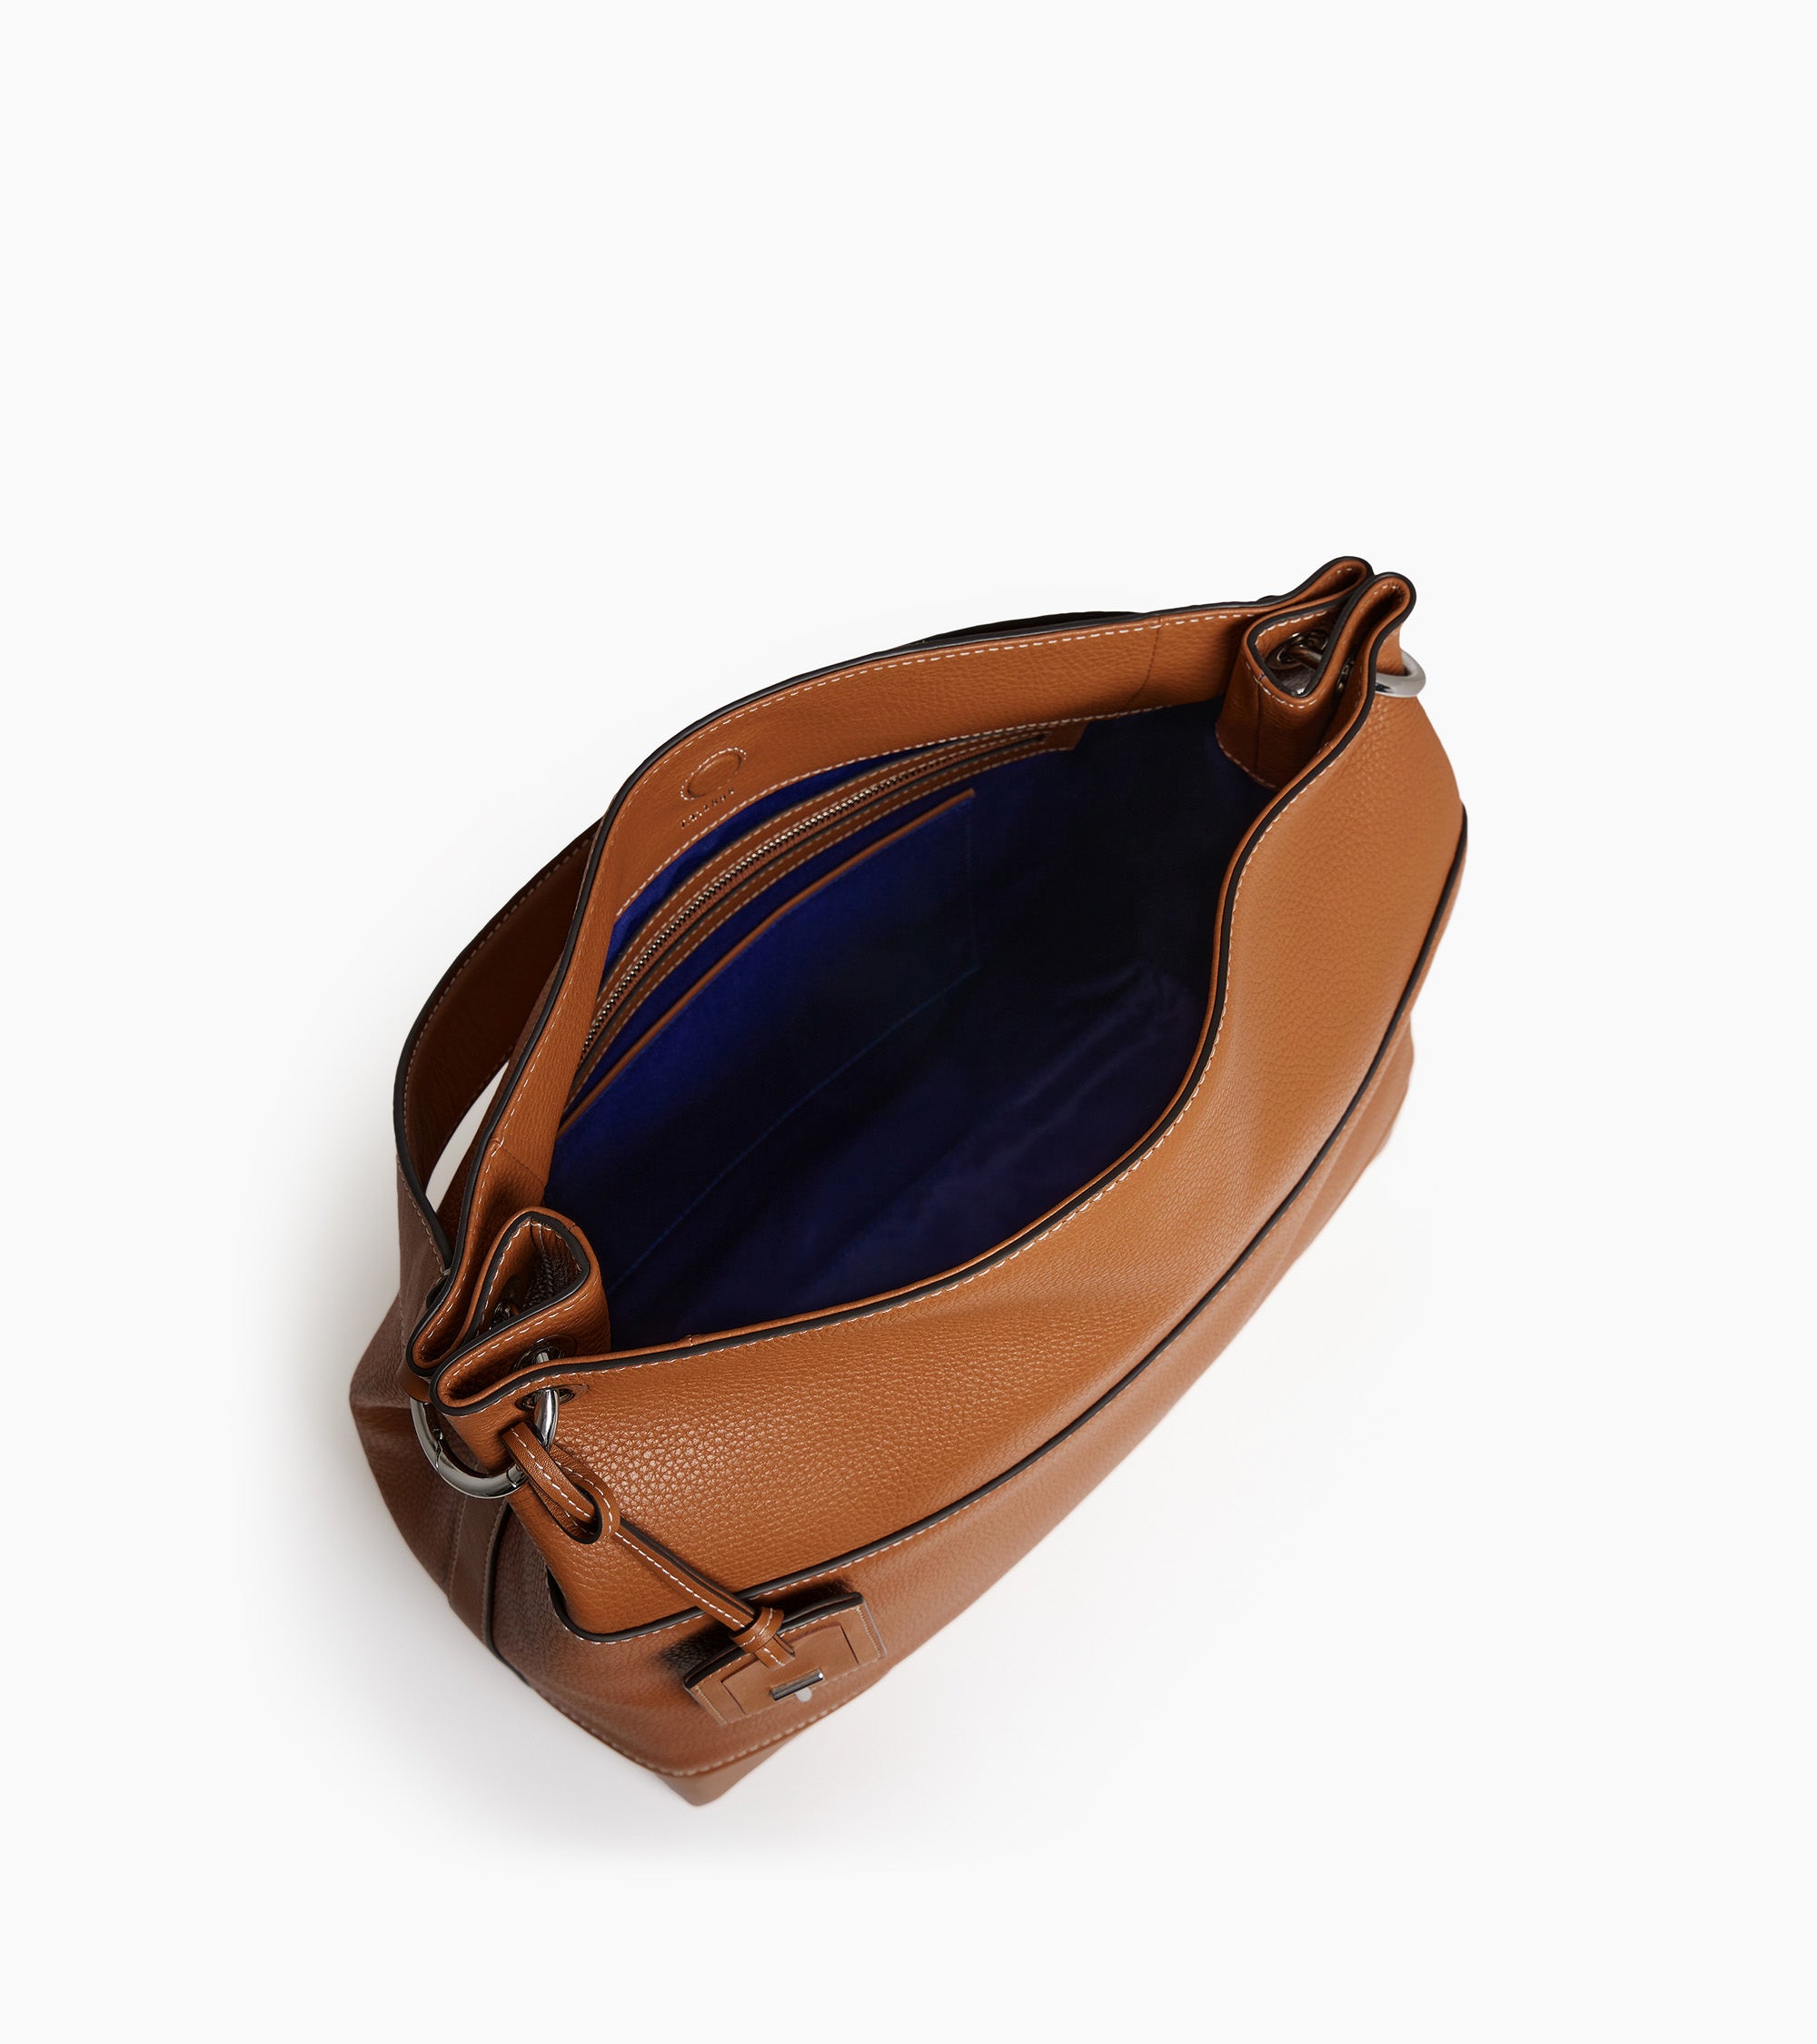 Romy large smooth and grained leather hobo bag